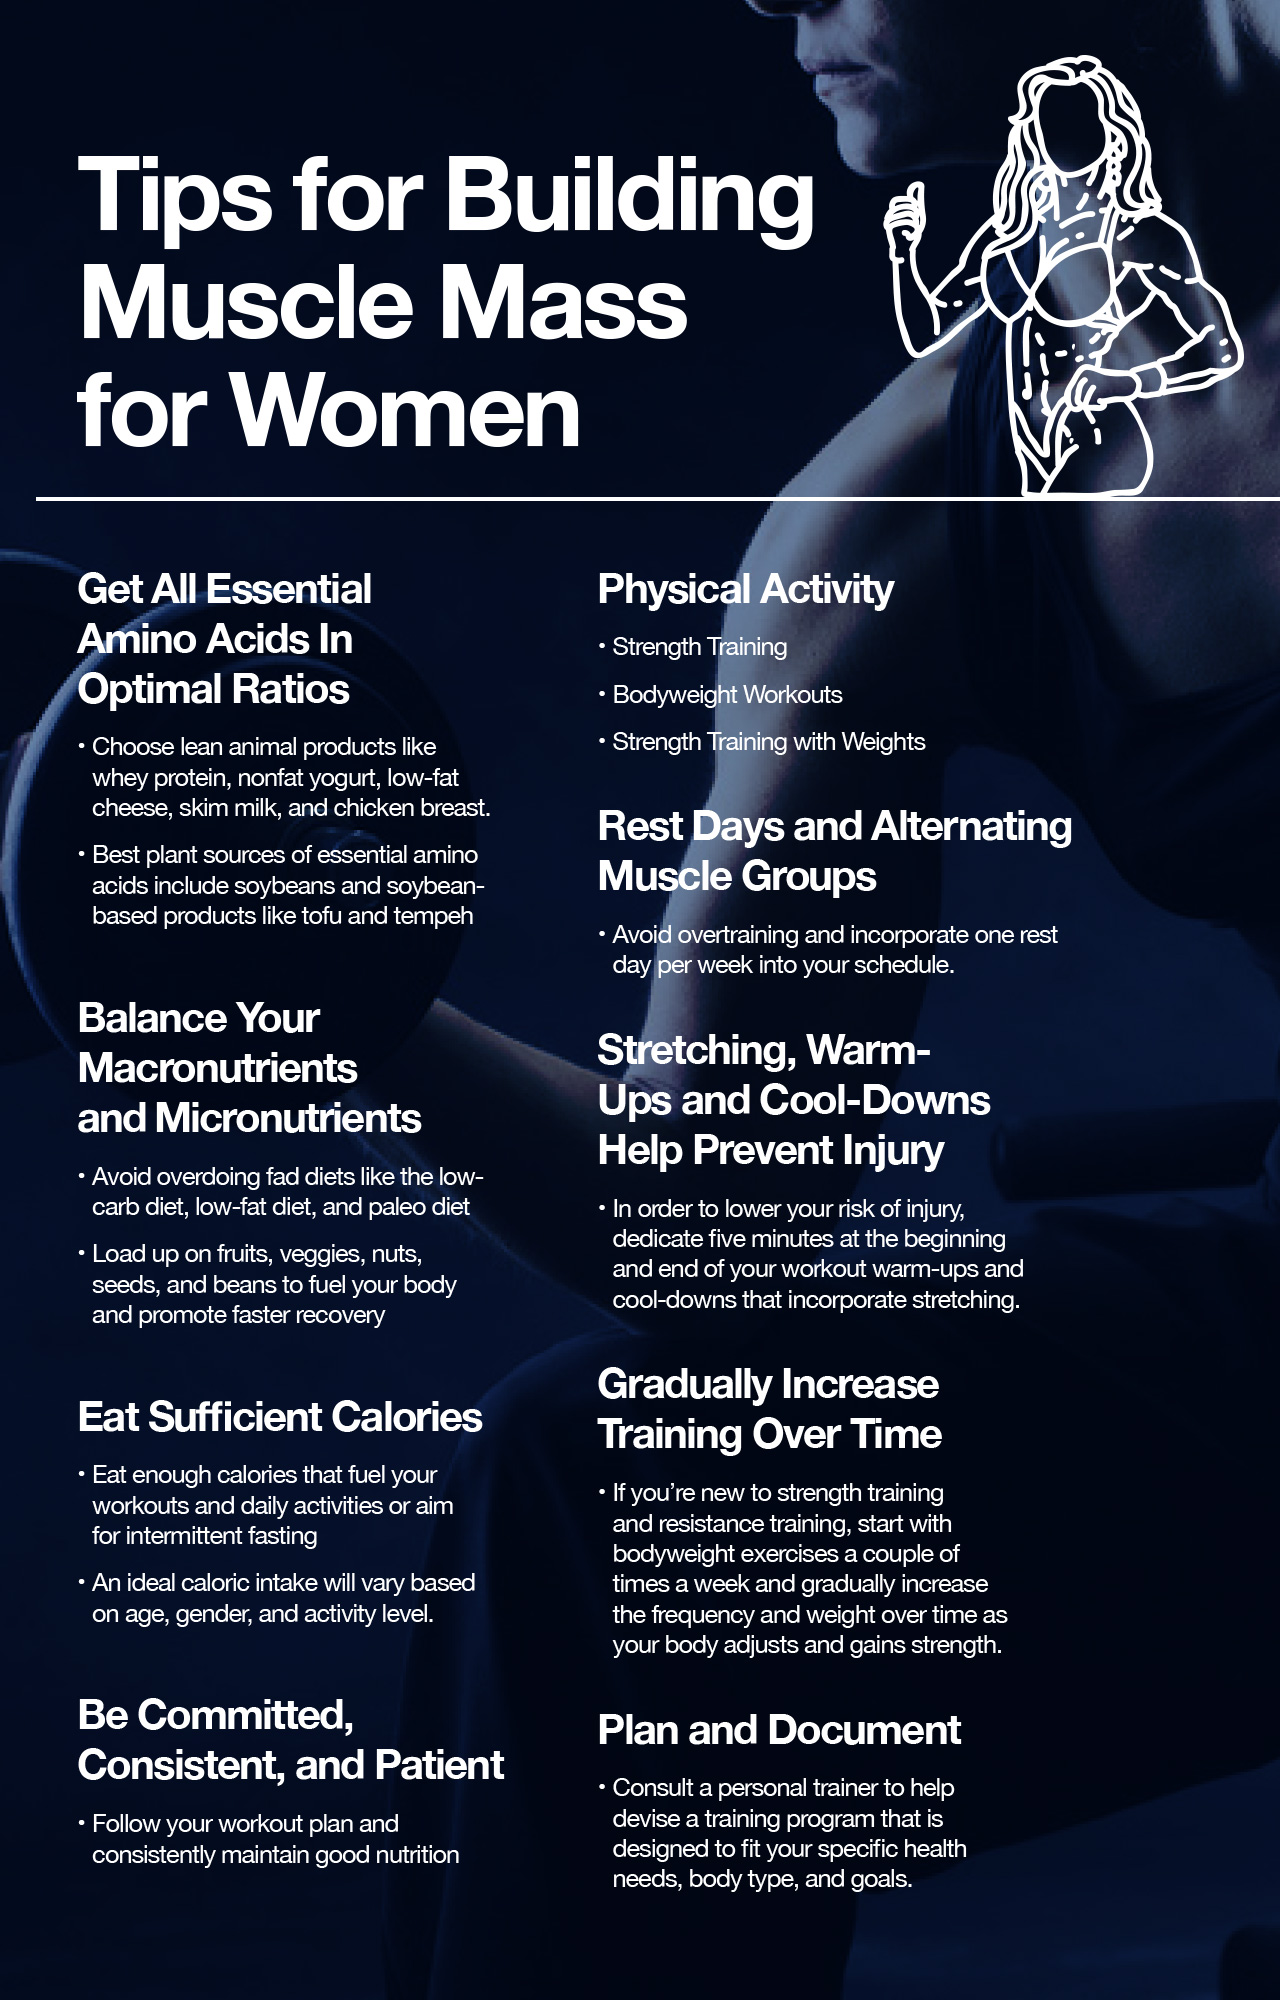 Tips for Building Muscle Mass for Women